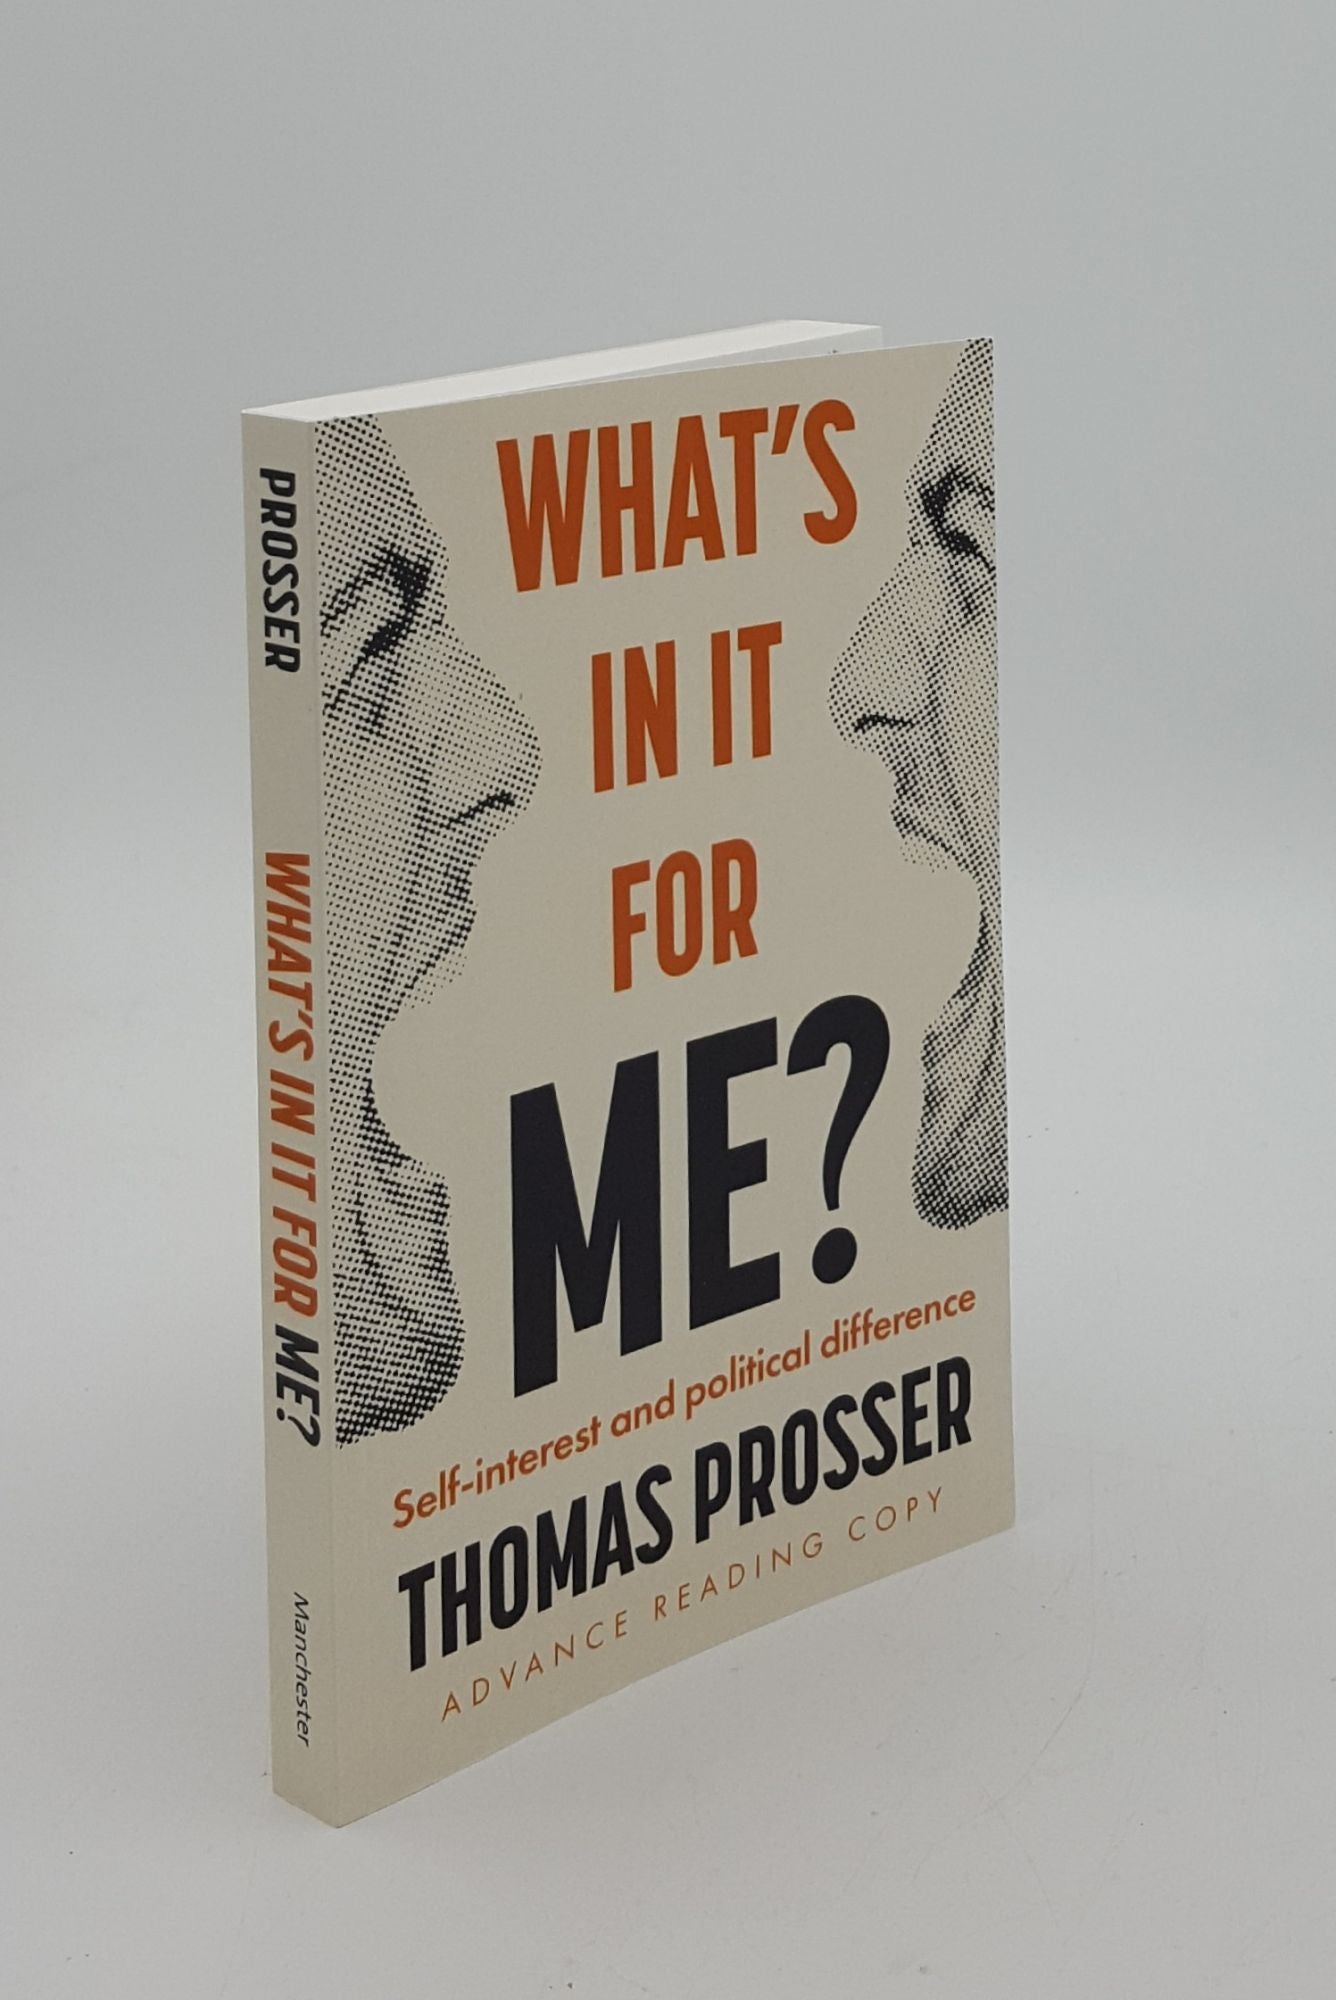 PROSSER Thomas - What's in It for Me? Self-Interest and Political Difference